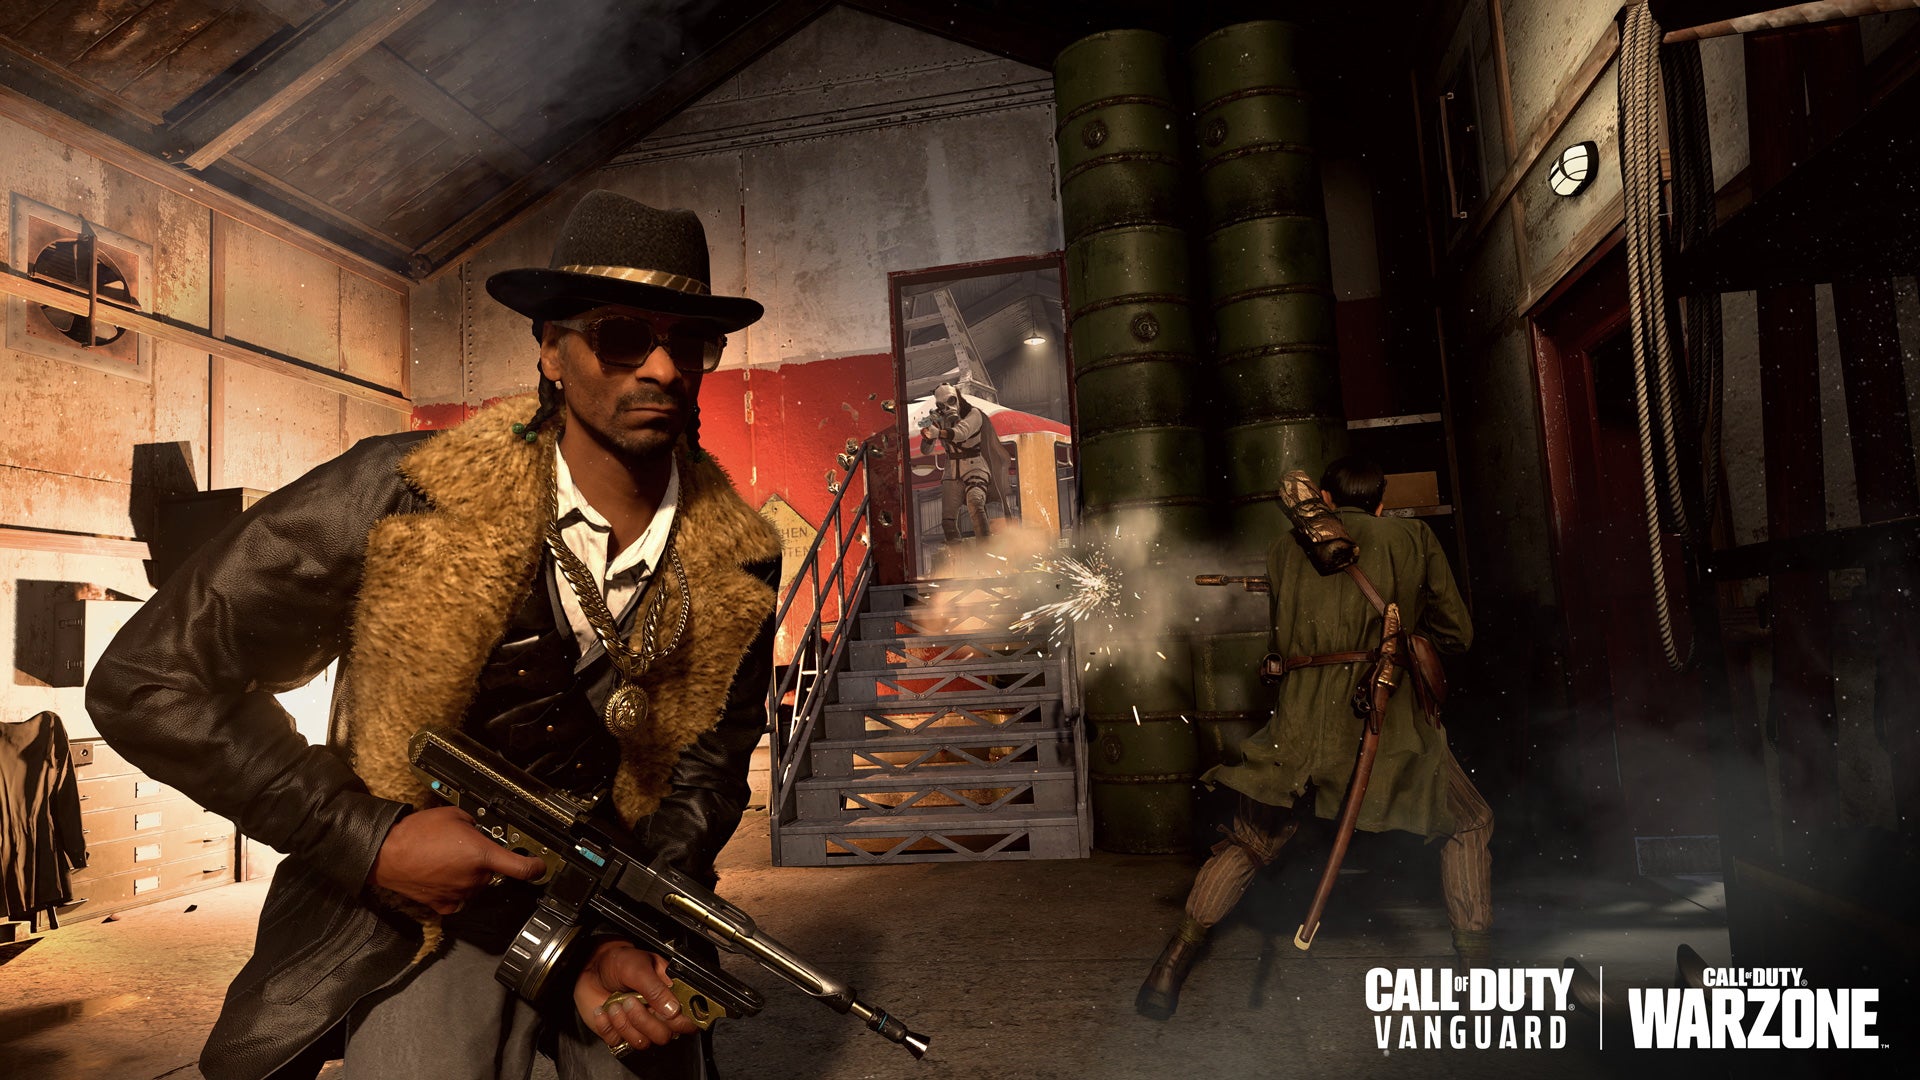 Image for Snoop Dogg is coming to Call of Duty: Vanguard and Warzone as an Operator